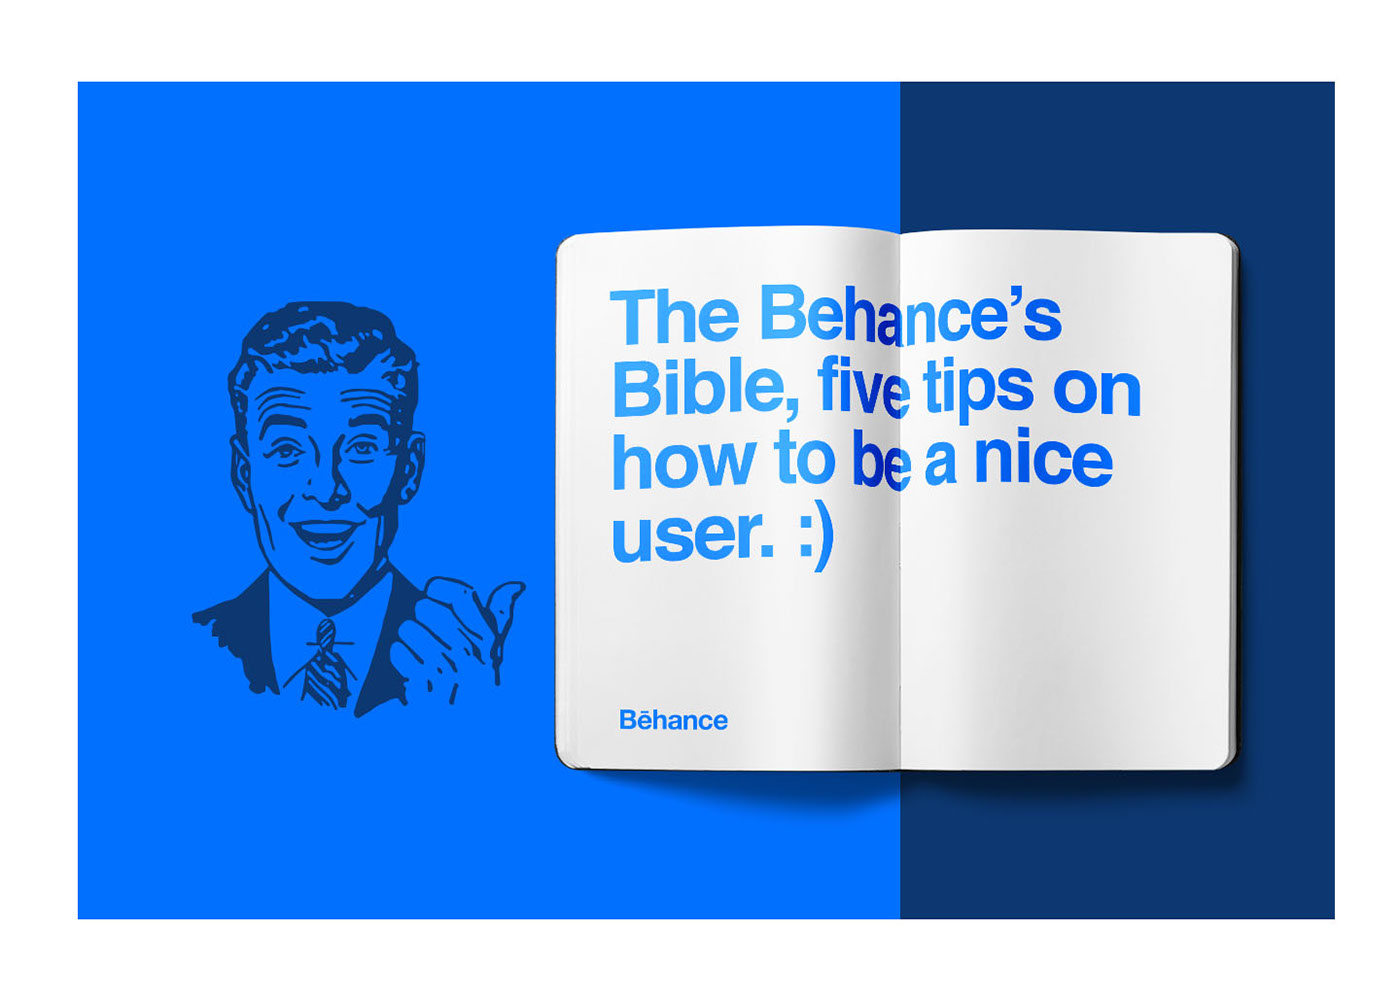 Behance book bible comments words happy help people how to tips